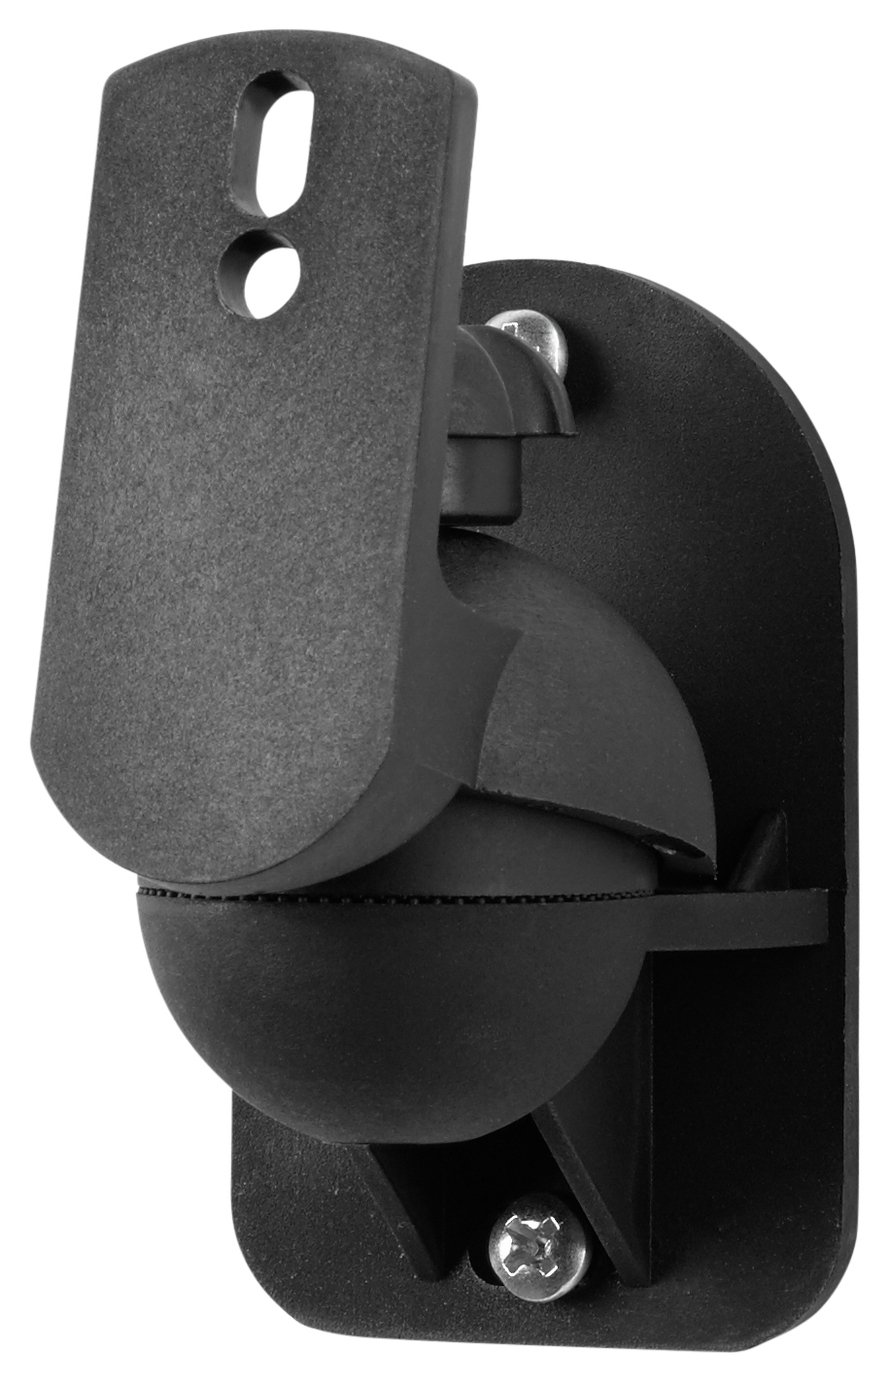 One For All WM5330 Universal Speaker Wall Mount Review